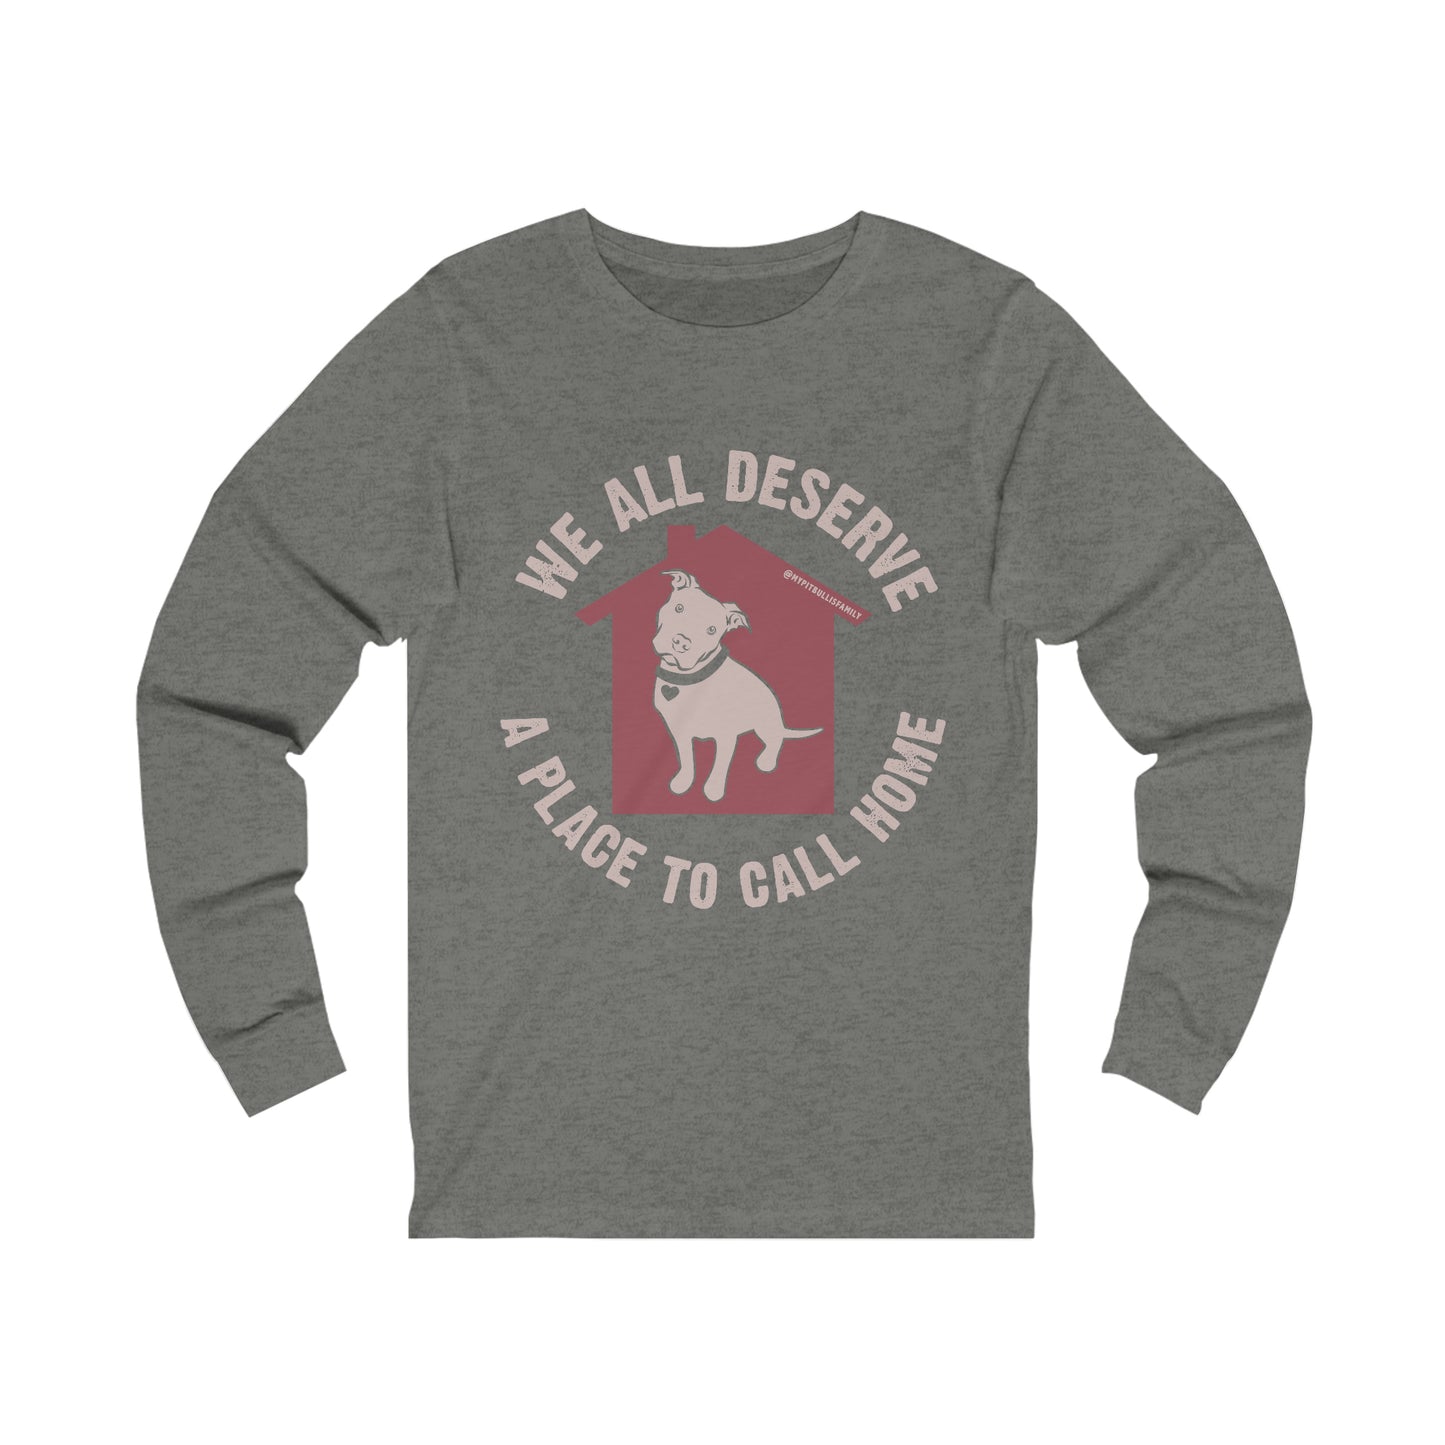 We All Deserve a Place to Call Home Unisex Jersey Long Sleeve Tee